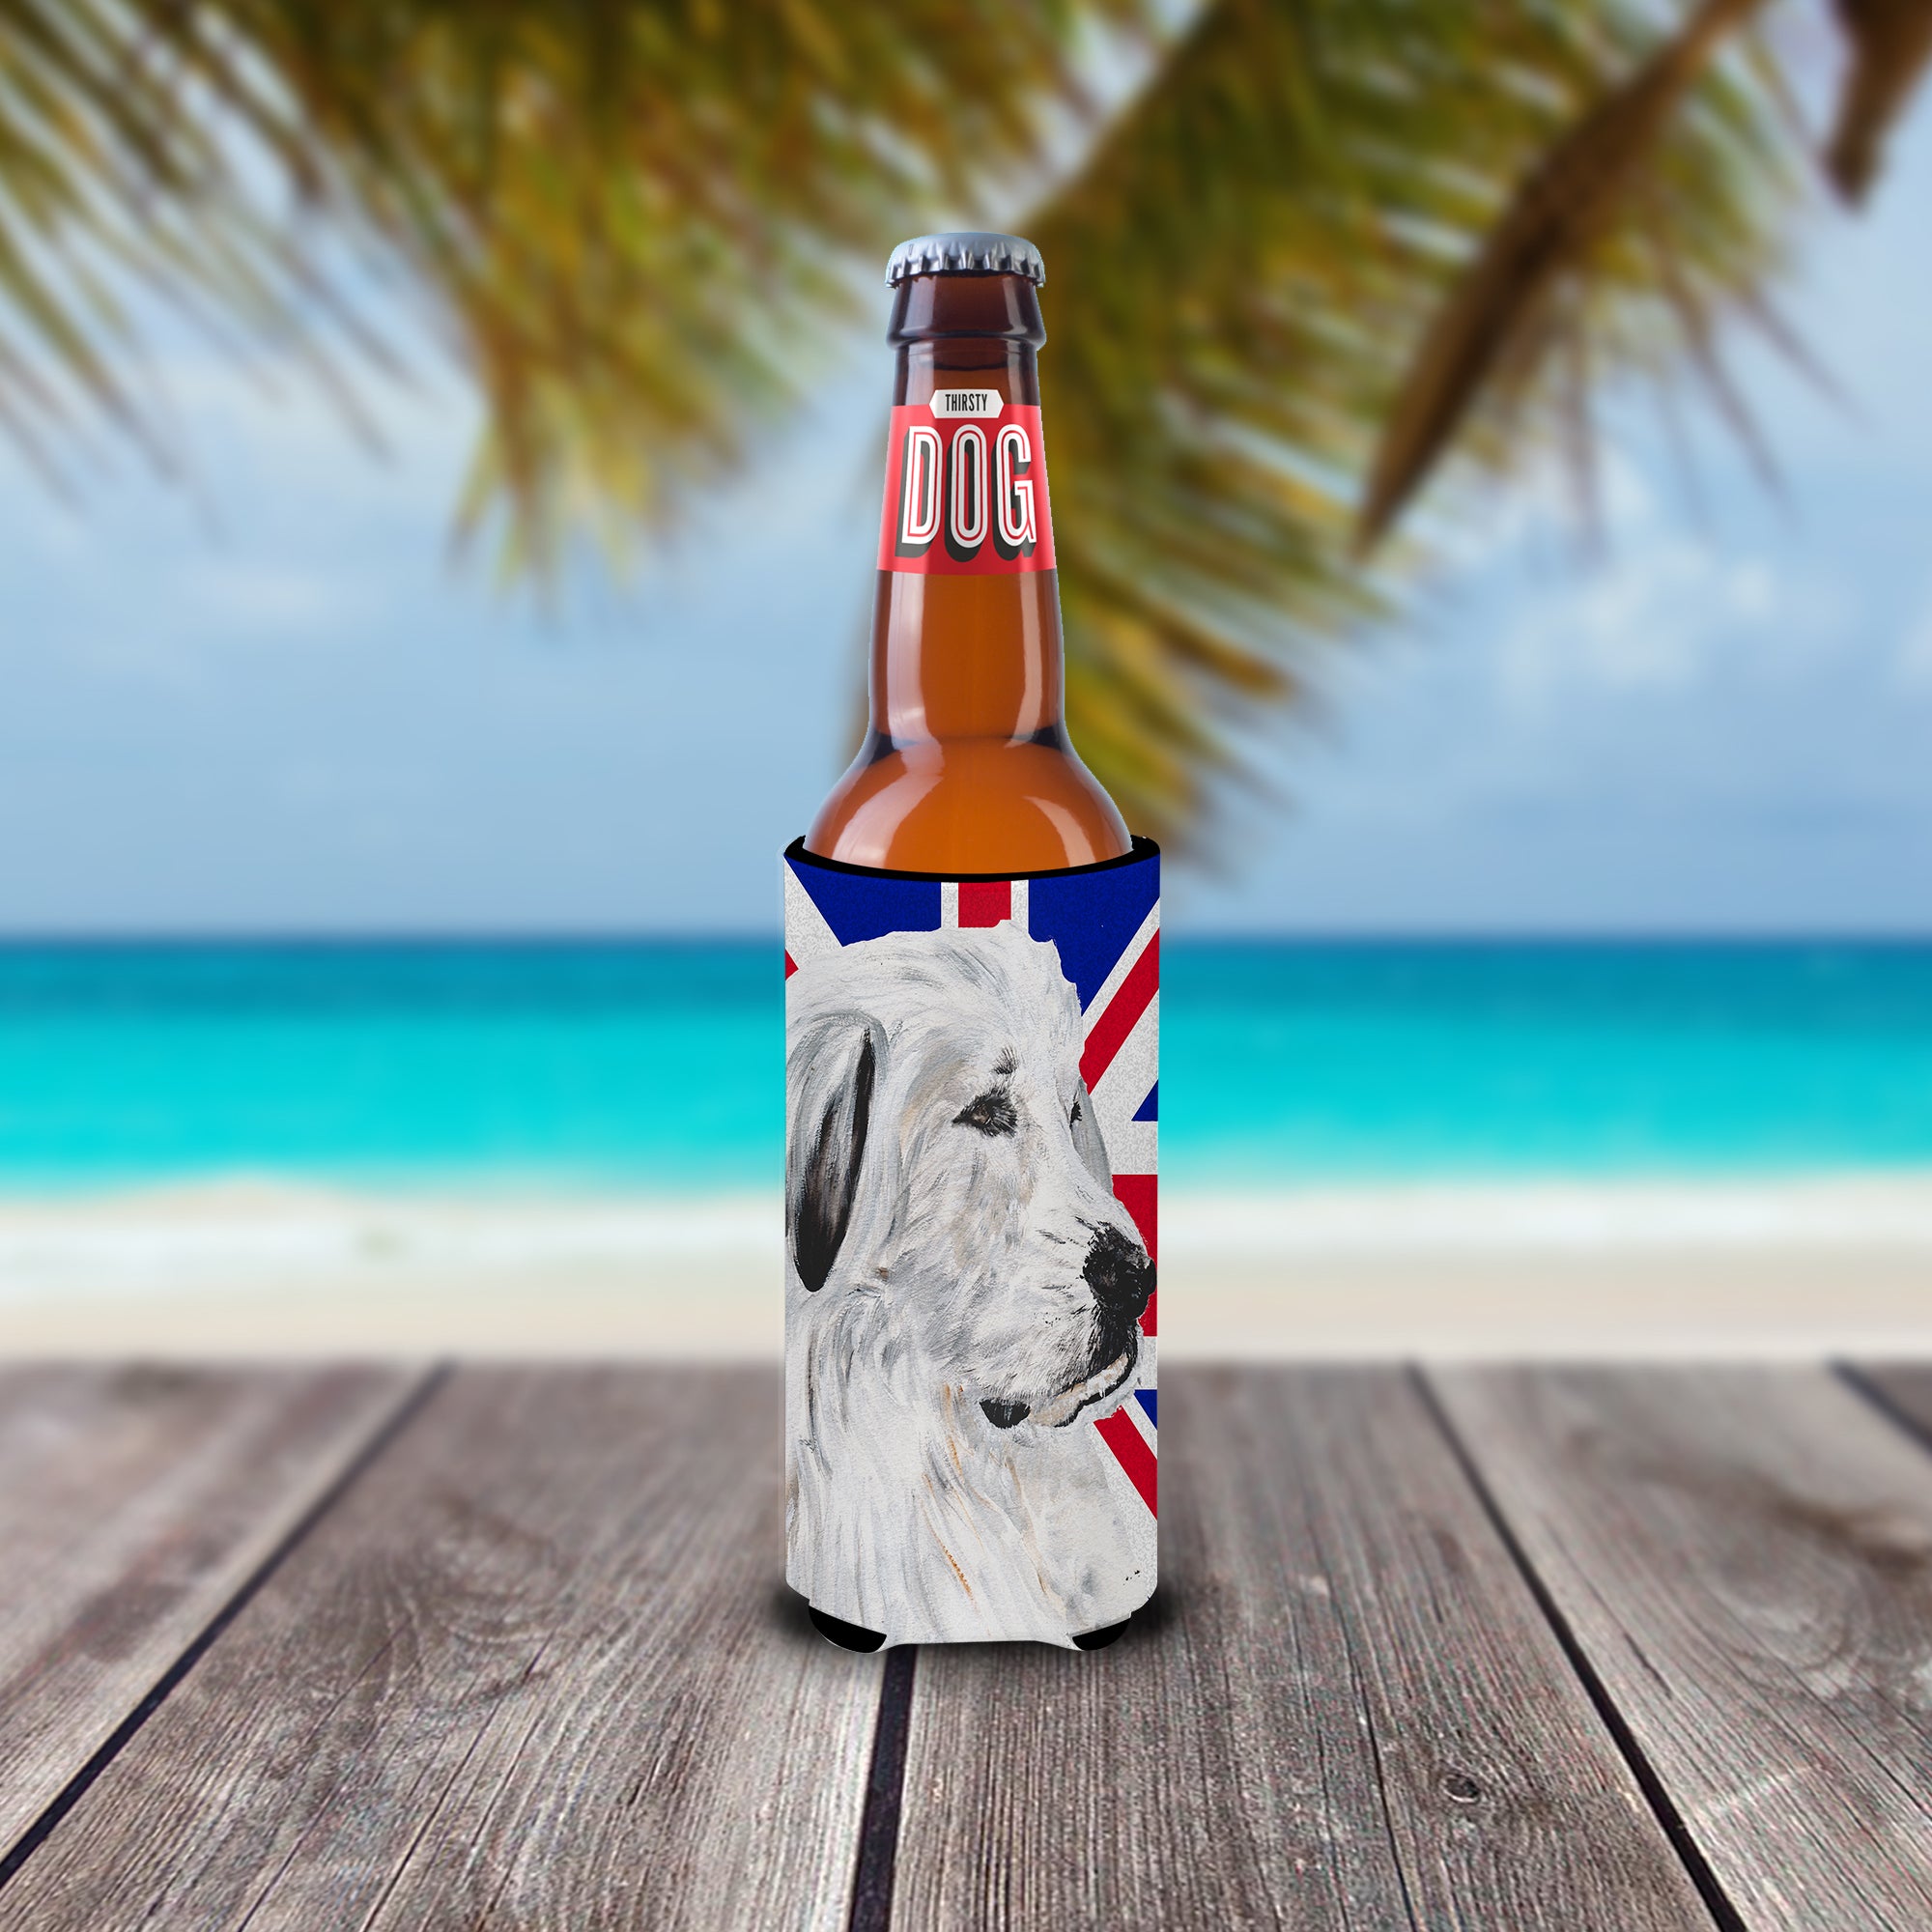 Great Pyrenees with English Union Jack British Flag Ultra Beverage Insulators for slim cans SC9873MUK